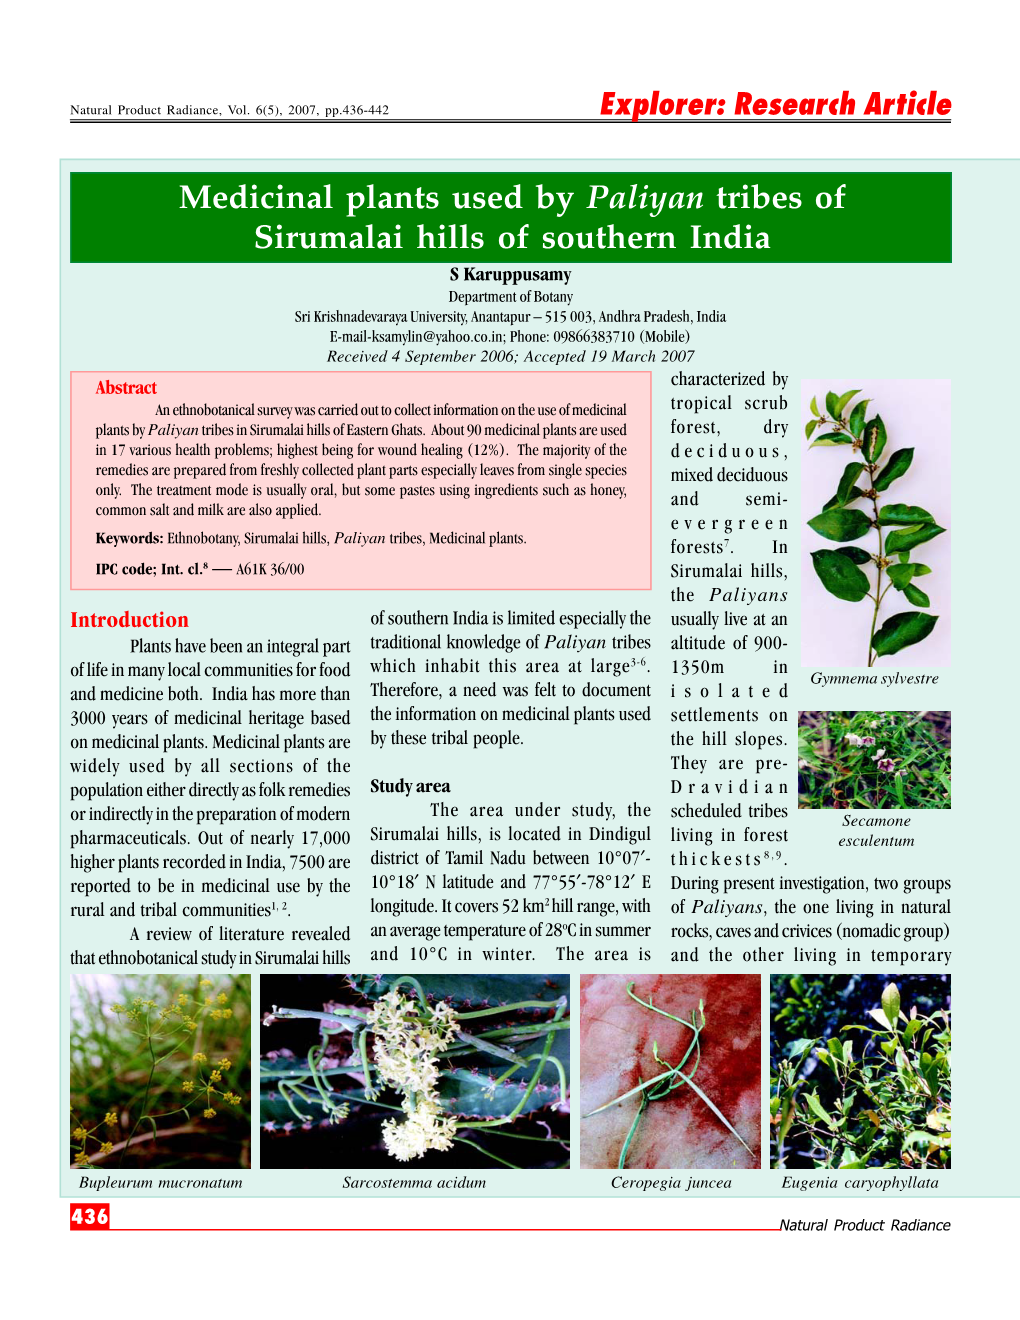 Medicinal Plants Used by the Paliyan Tribes of Sirumalai Hills of Southern